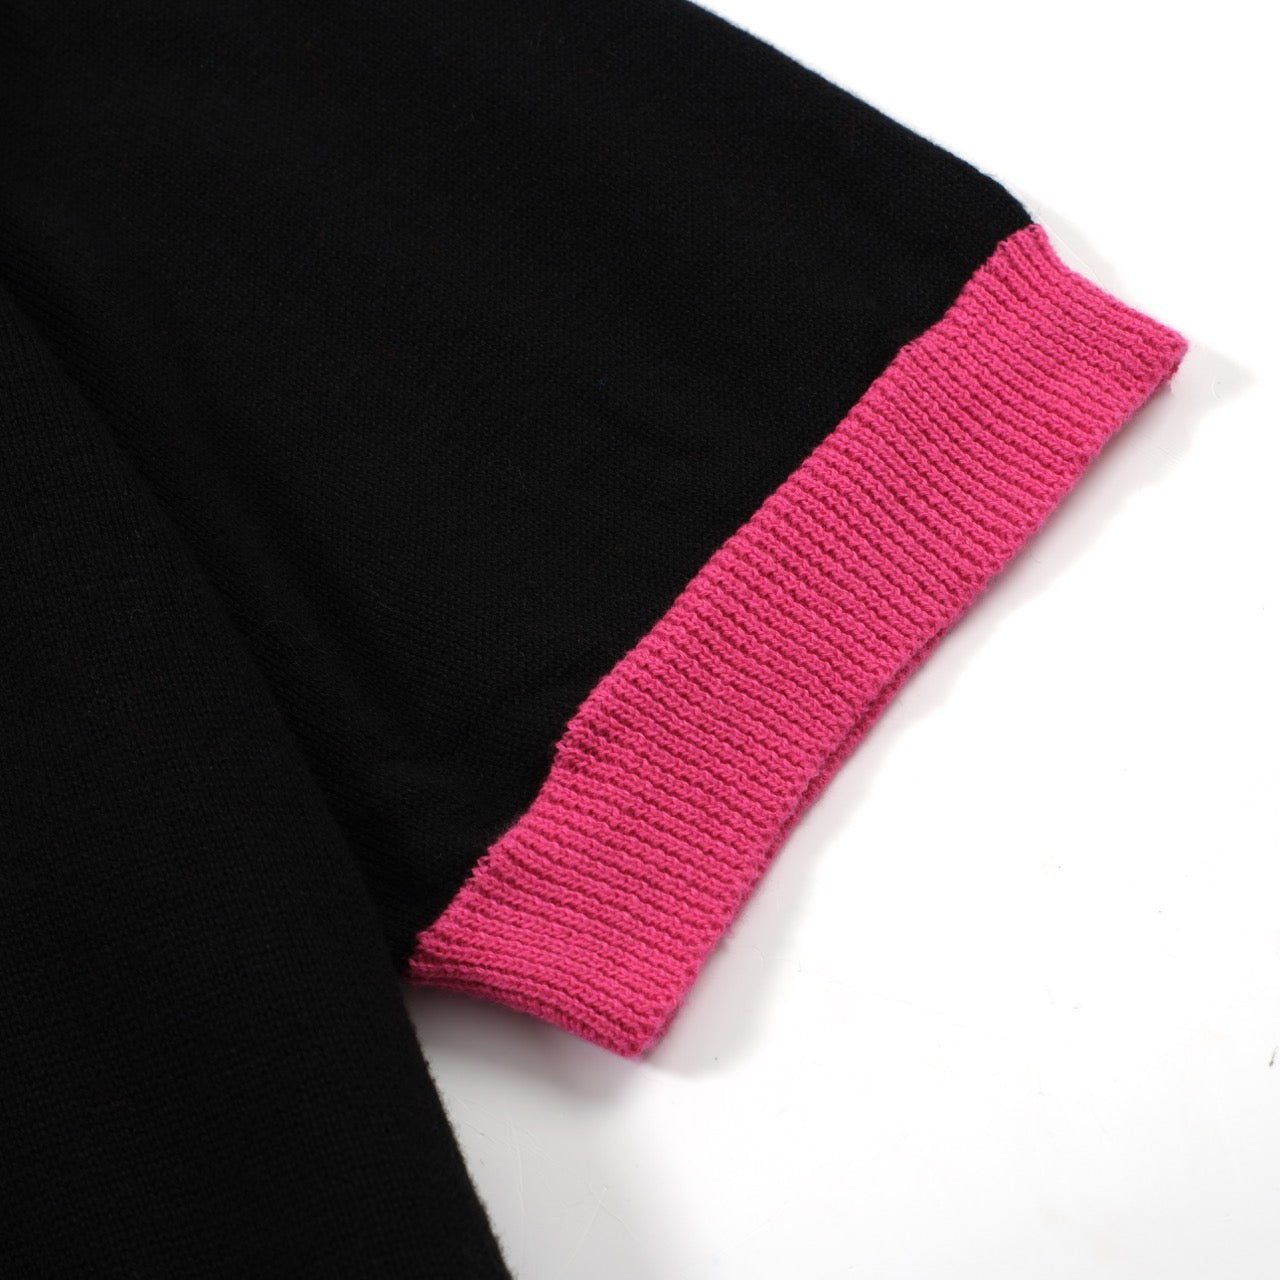 OXKNIT Women Vintage Clothing 1970s Mod Style Casual Black & Pink Knitted Short Sleeves Knitwear Retro Tshirt